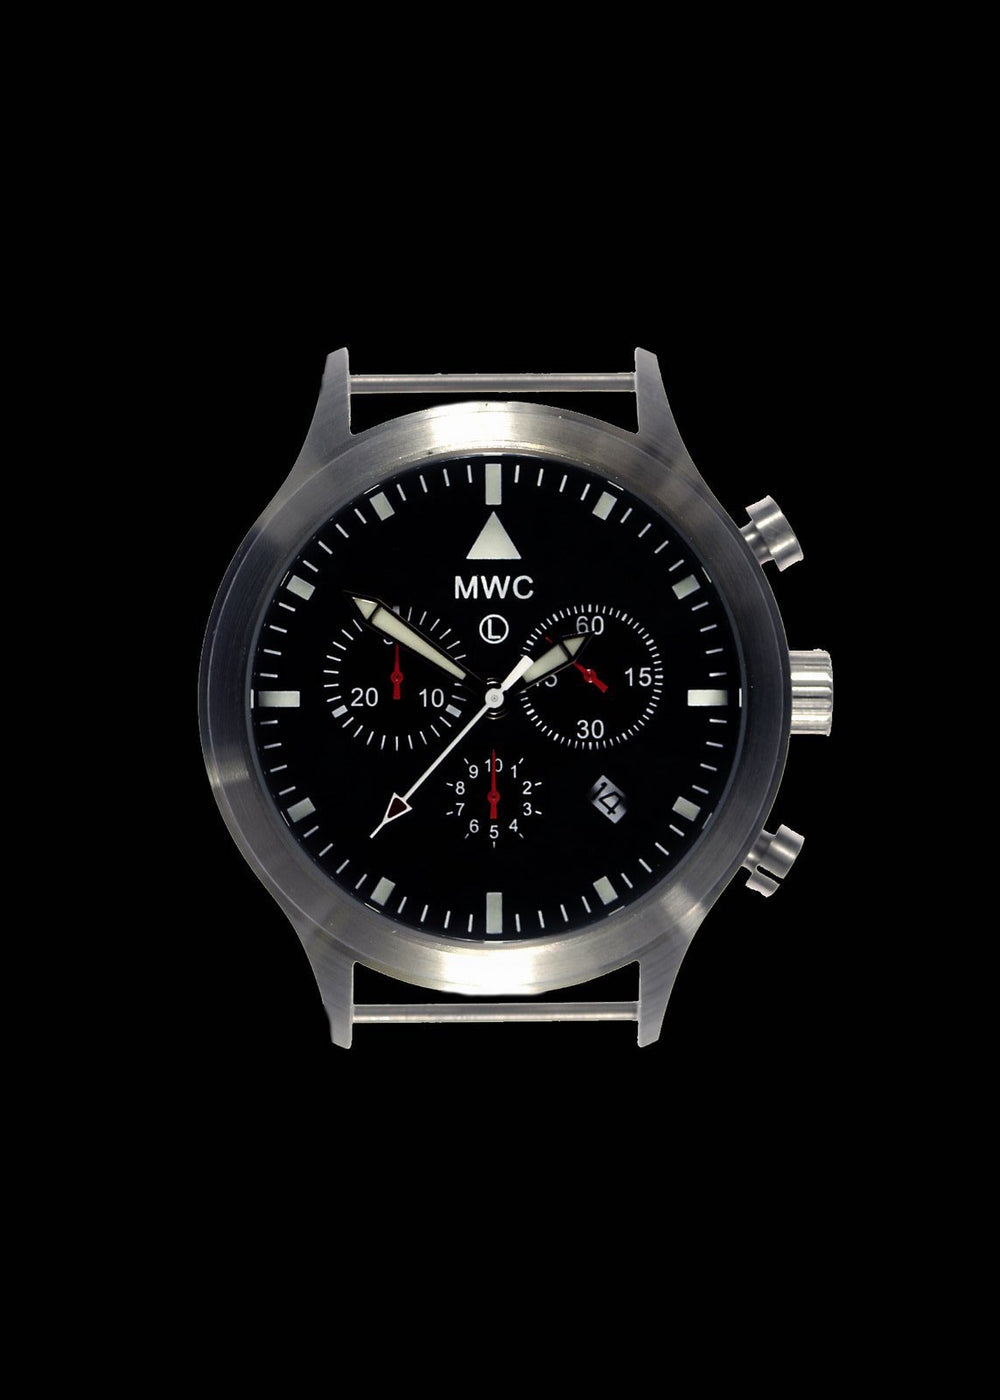 MWC Classic Pilots Watch - MIL-TEC MKIV Stainless Steel Military Pilots Chronograph